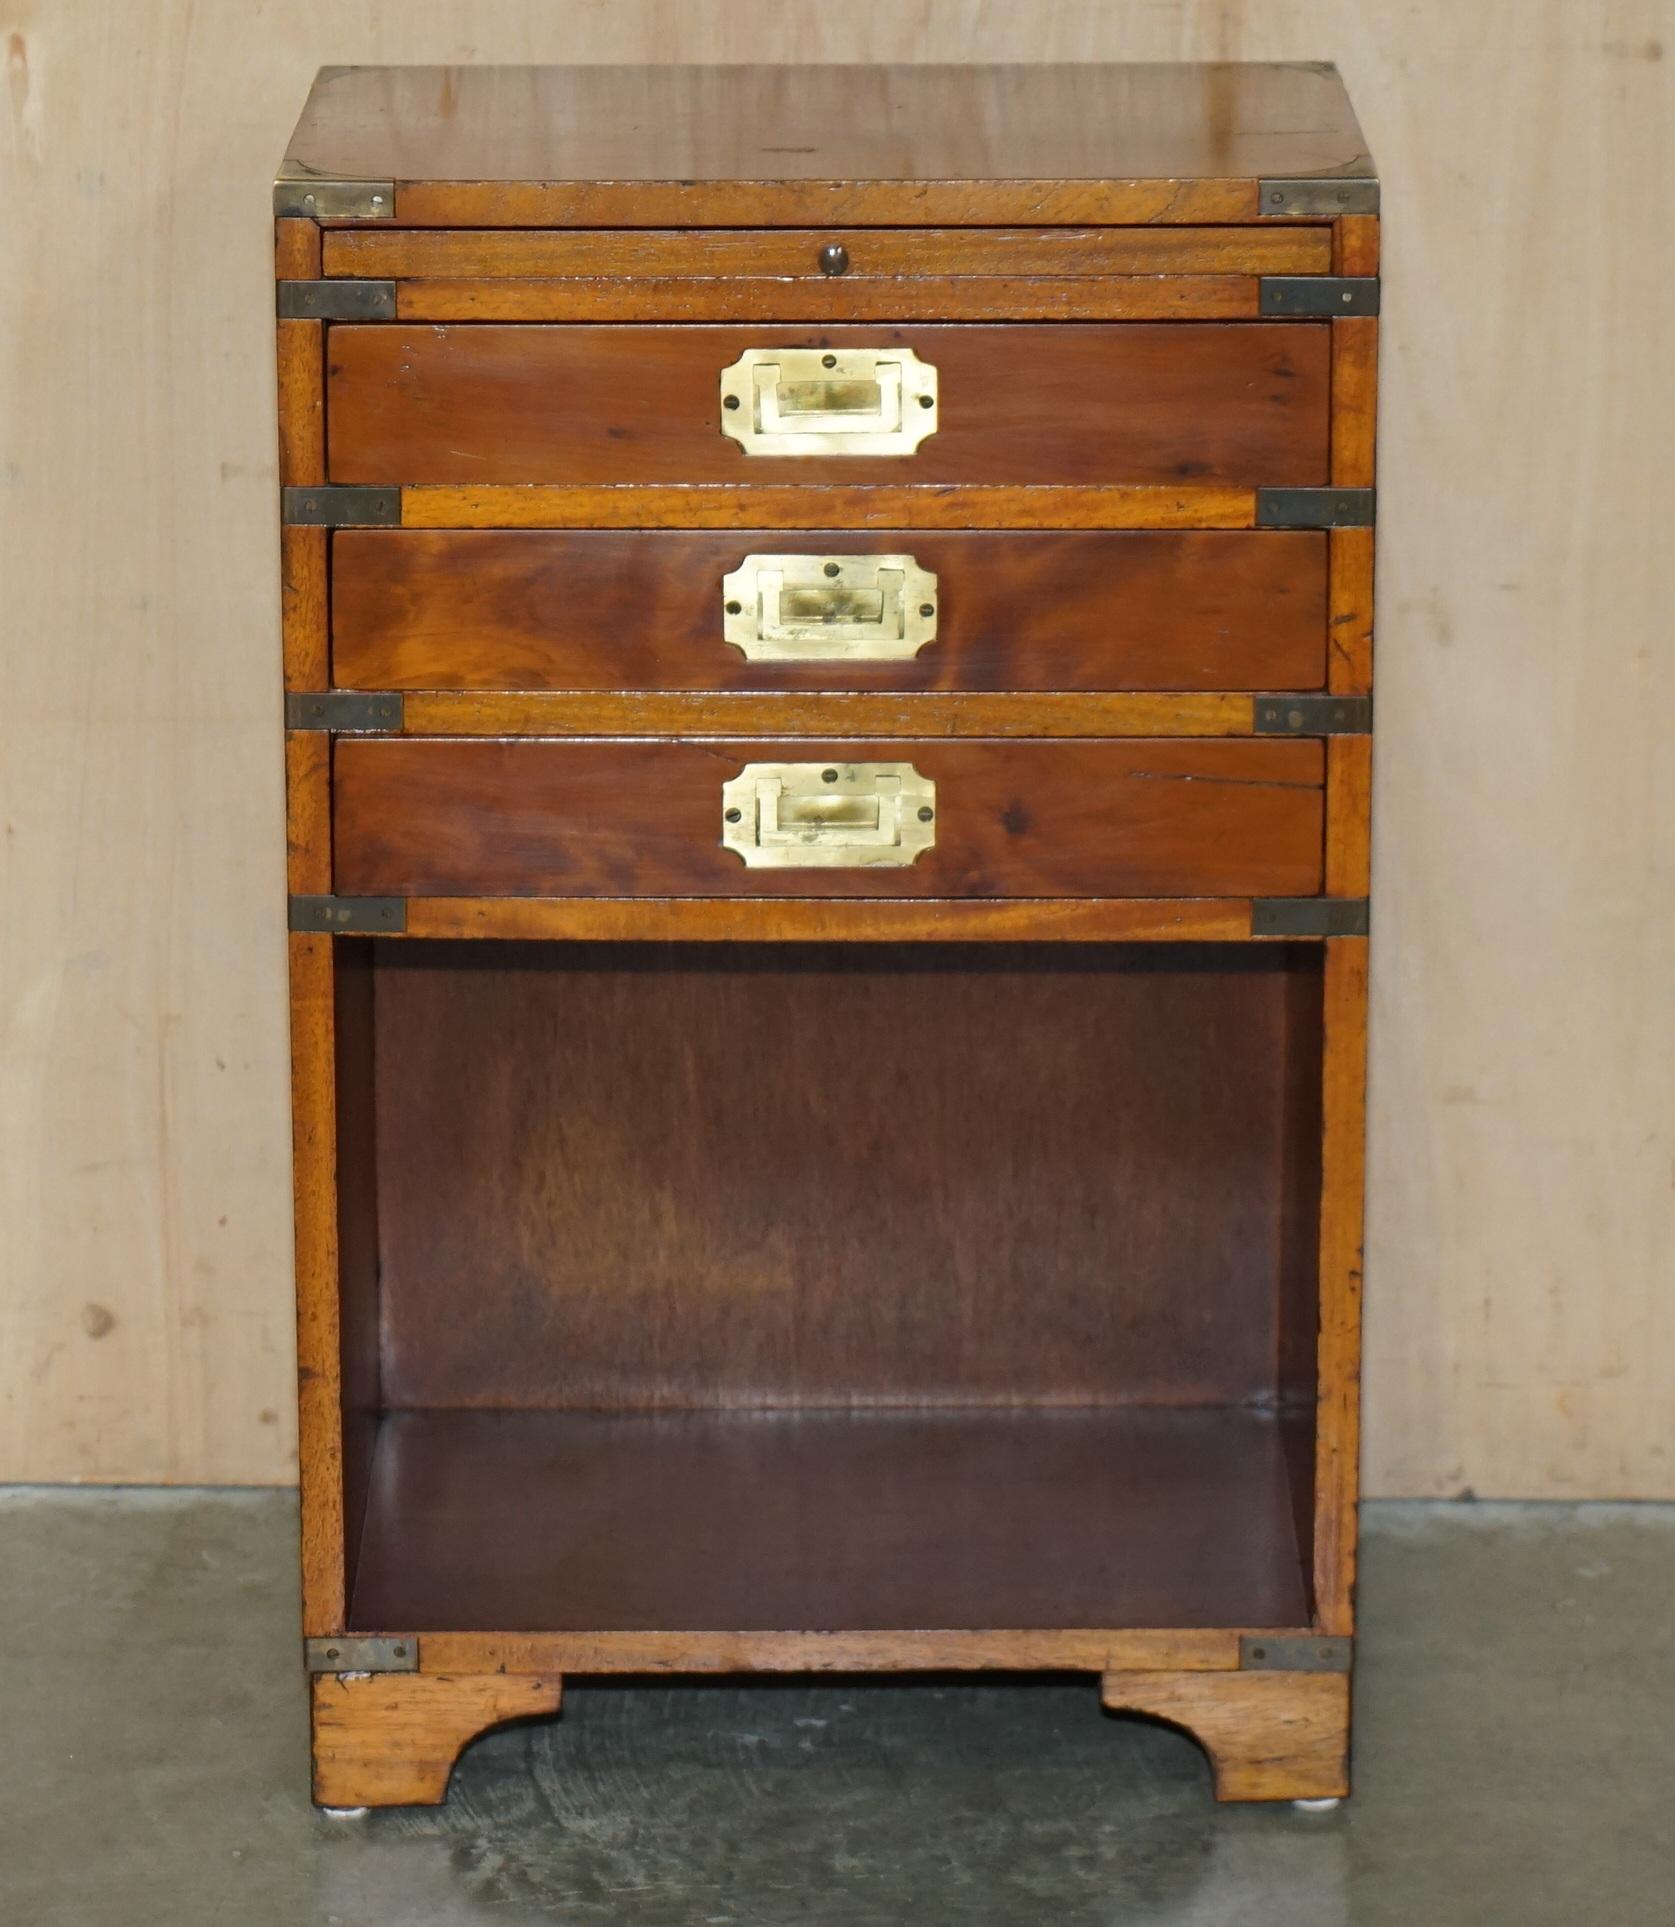 Royal House Antiques

Royal House Antiques is delighted to offer for sale this sublime vintage Bachelors chest with butlers serving tray and Military Campaign drawers.

Please note the delivery fee listed is just a guide, it covers within the M25